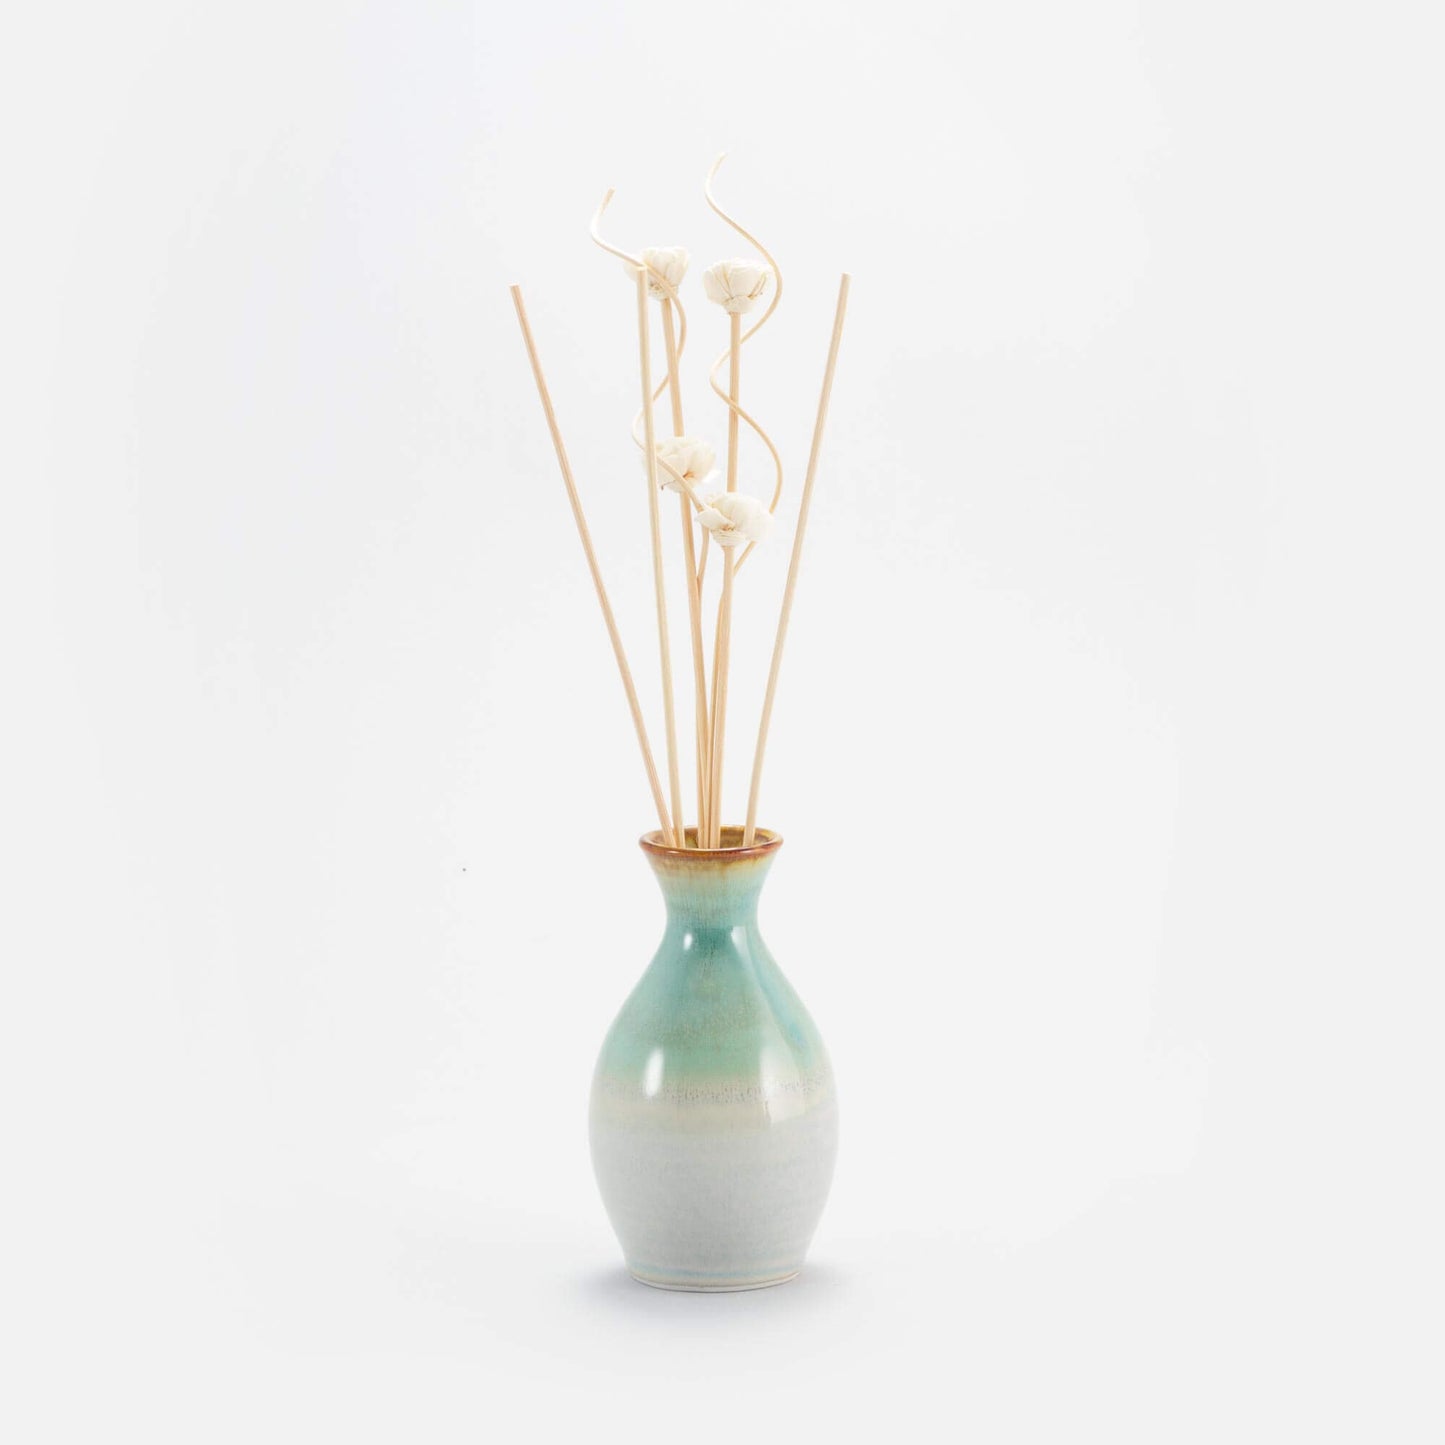 Handmade Pottery Diffuser in Ivory & Green pattern made by Georgetown Pottery in Maine